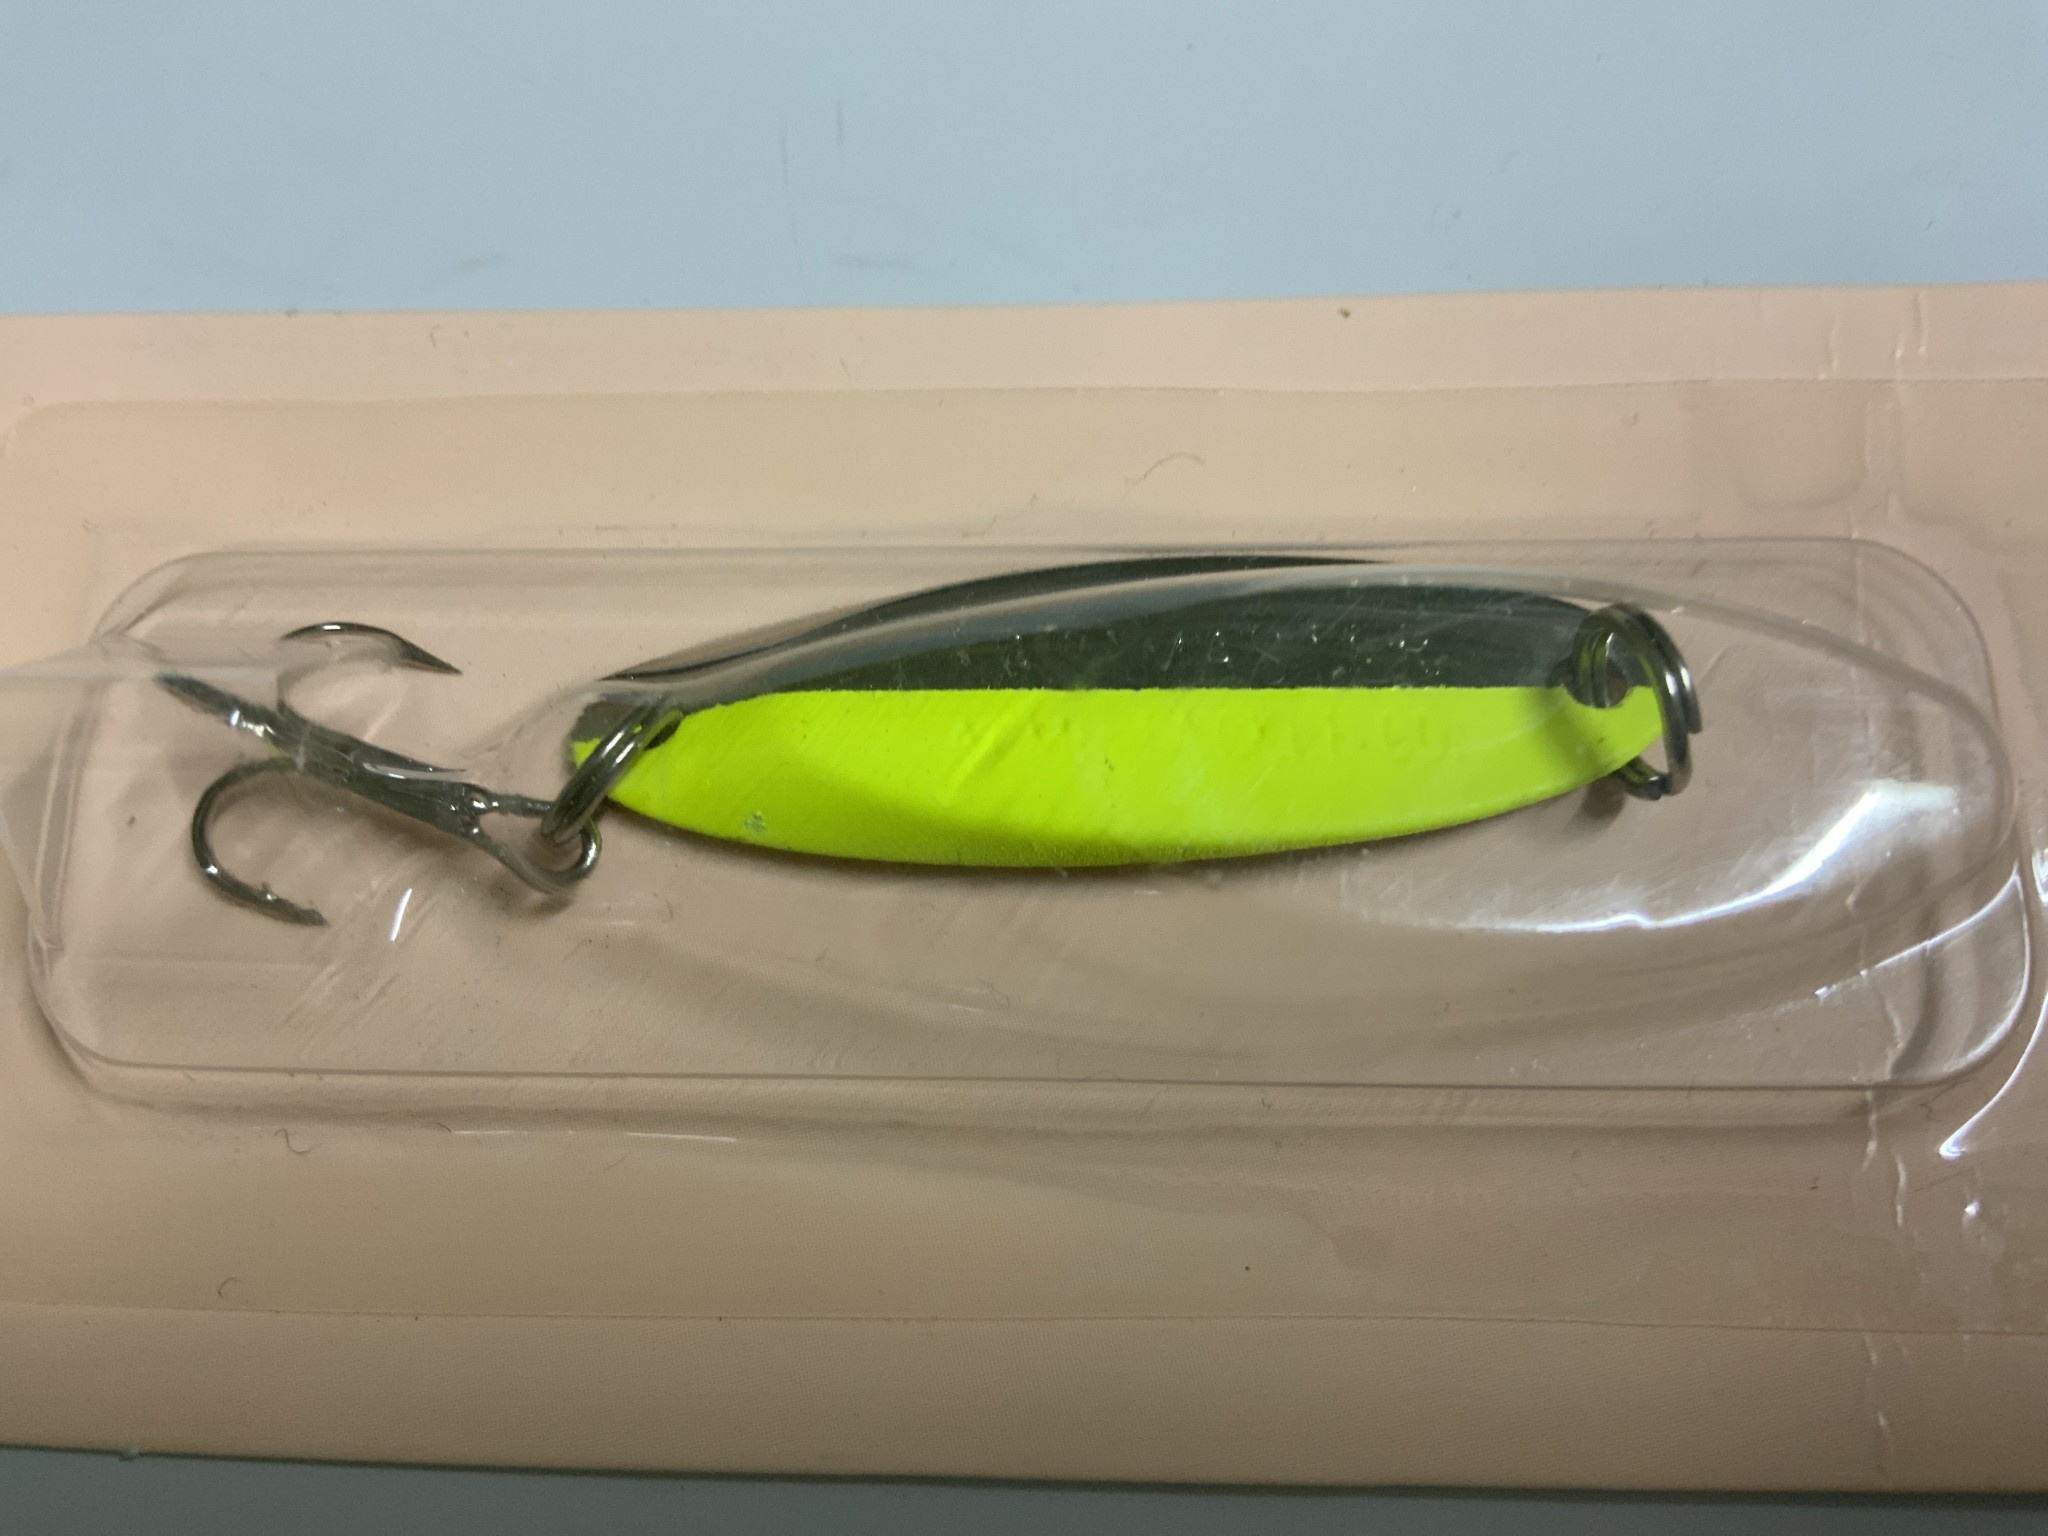 Acme Tackle Kastmaster Fishing Lure Spoon Chrome with Chartreuse Stripe 3/4  oz.